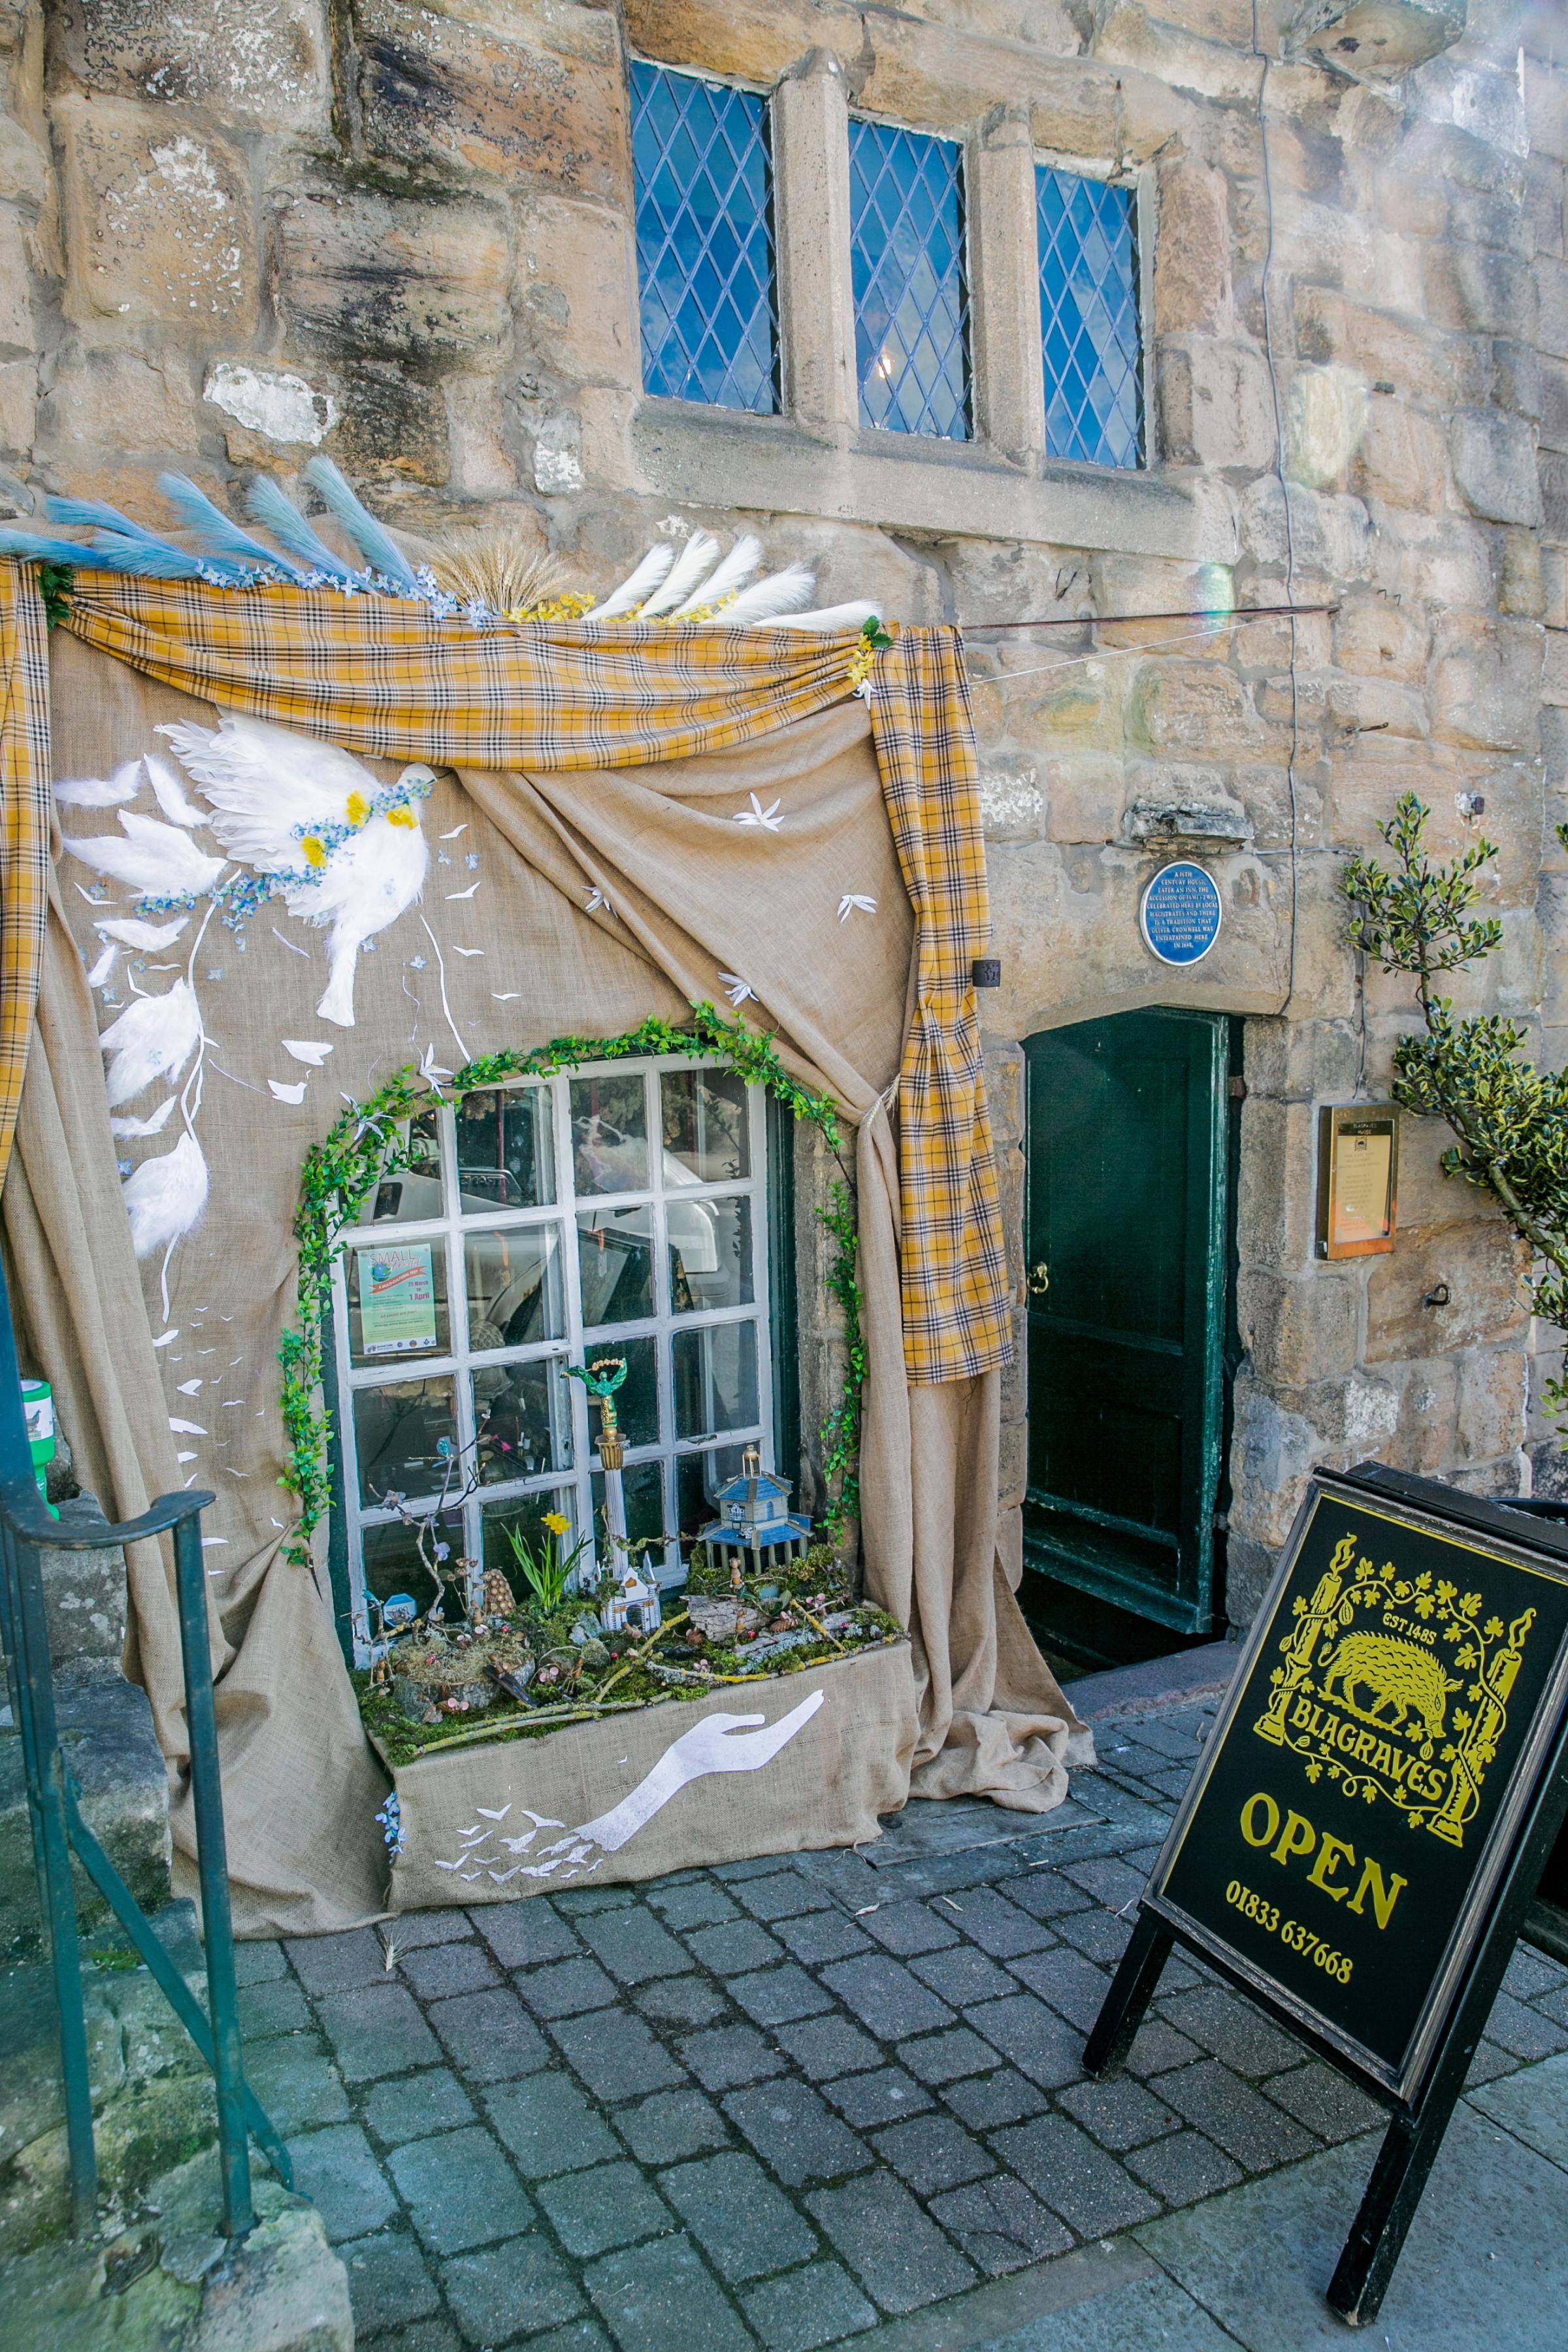 Shops in Barnard Castle have created window displays for the Small World festival Picture: SARAH CALDECOTT